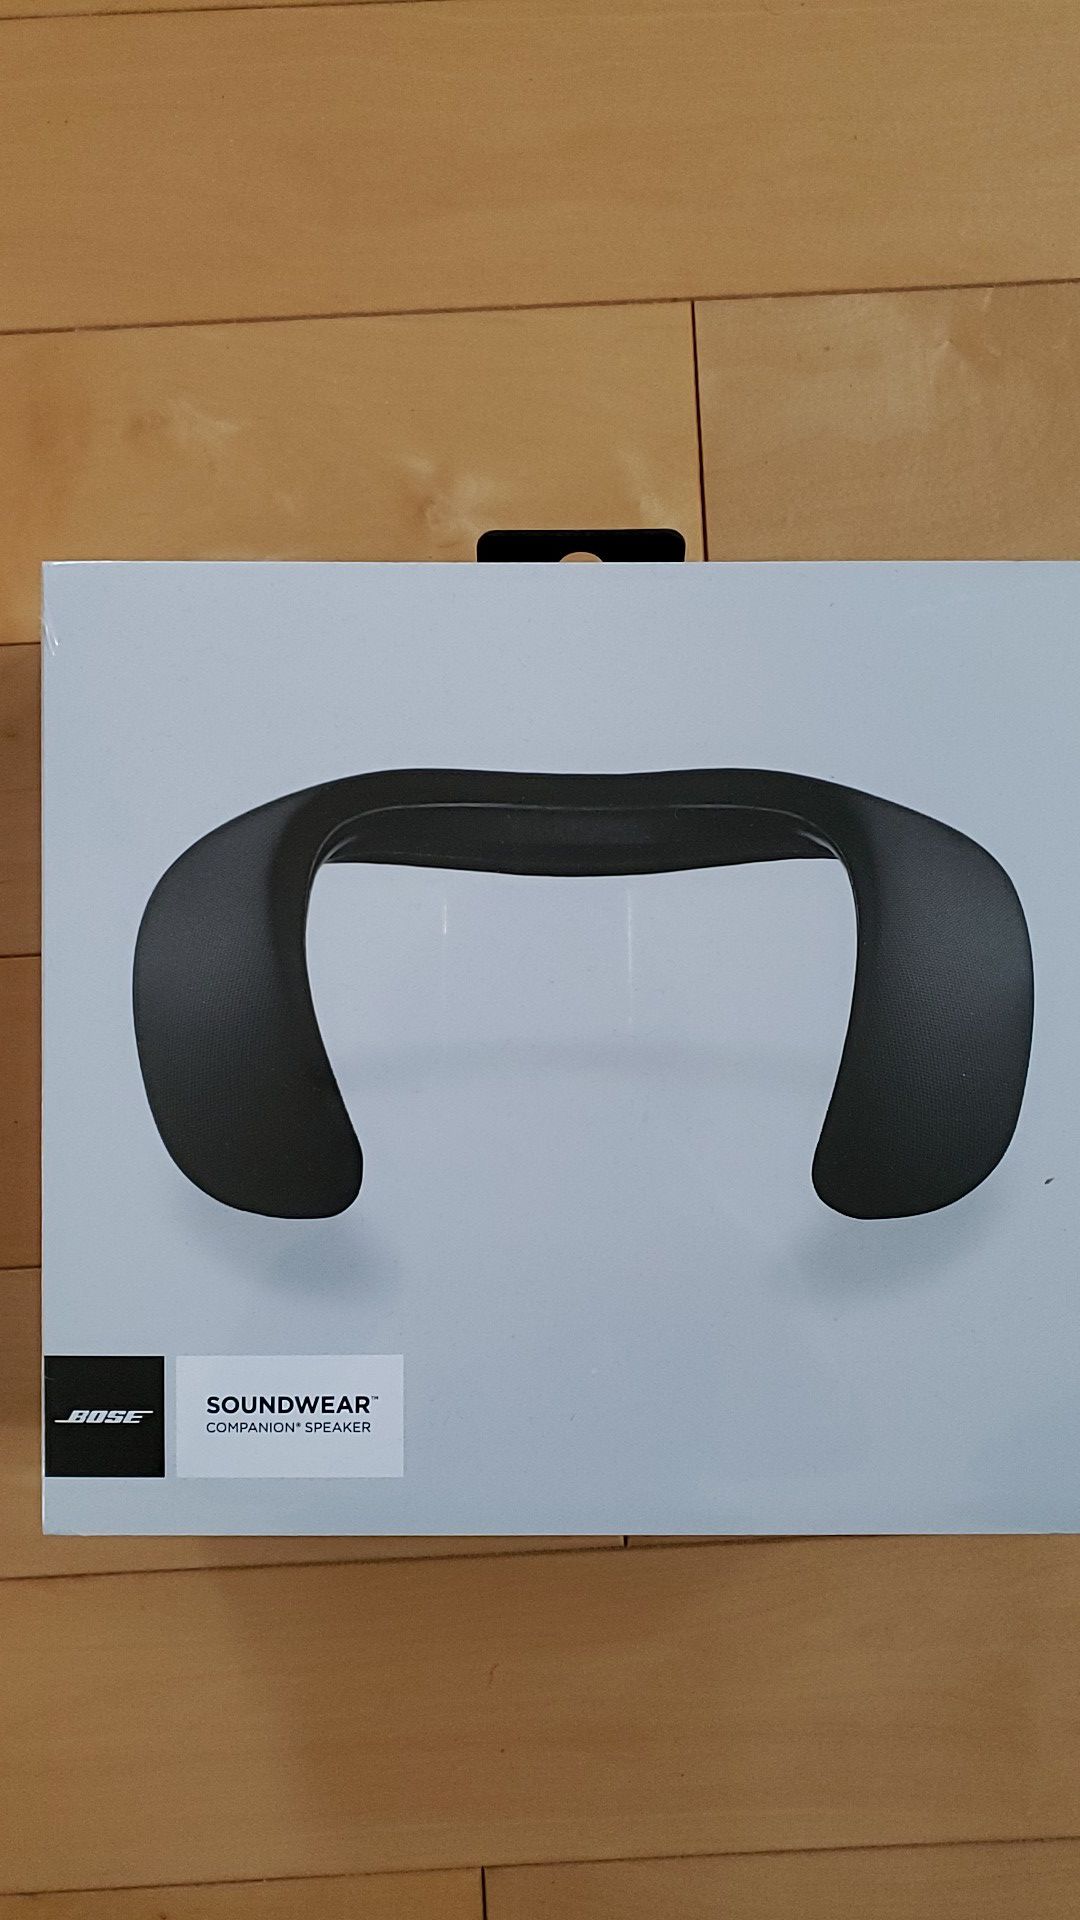 Bose soundwear brand new sealed in box